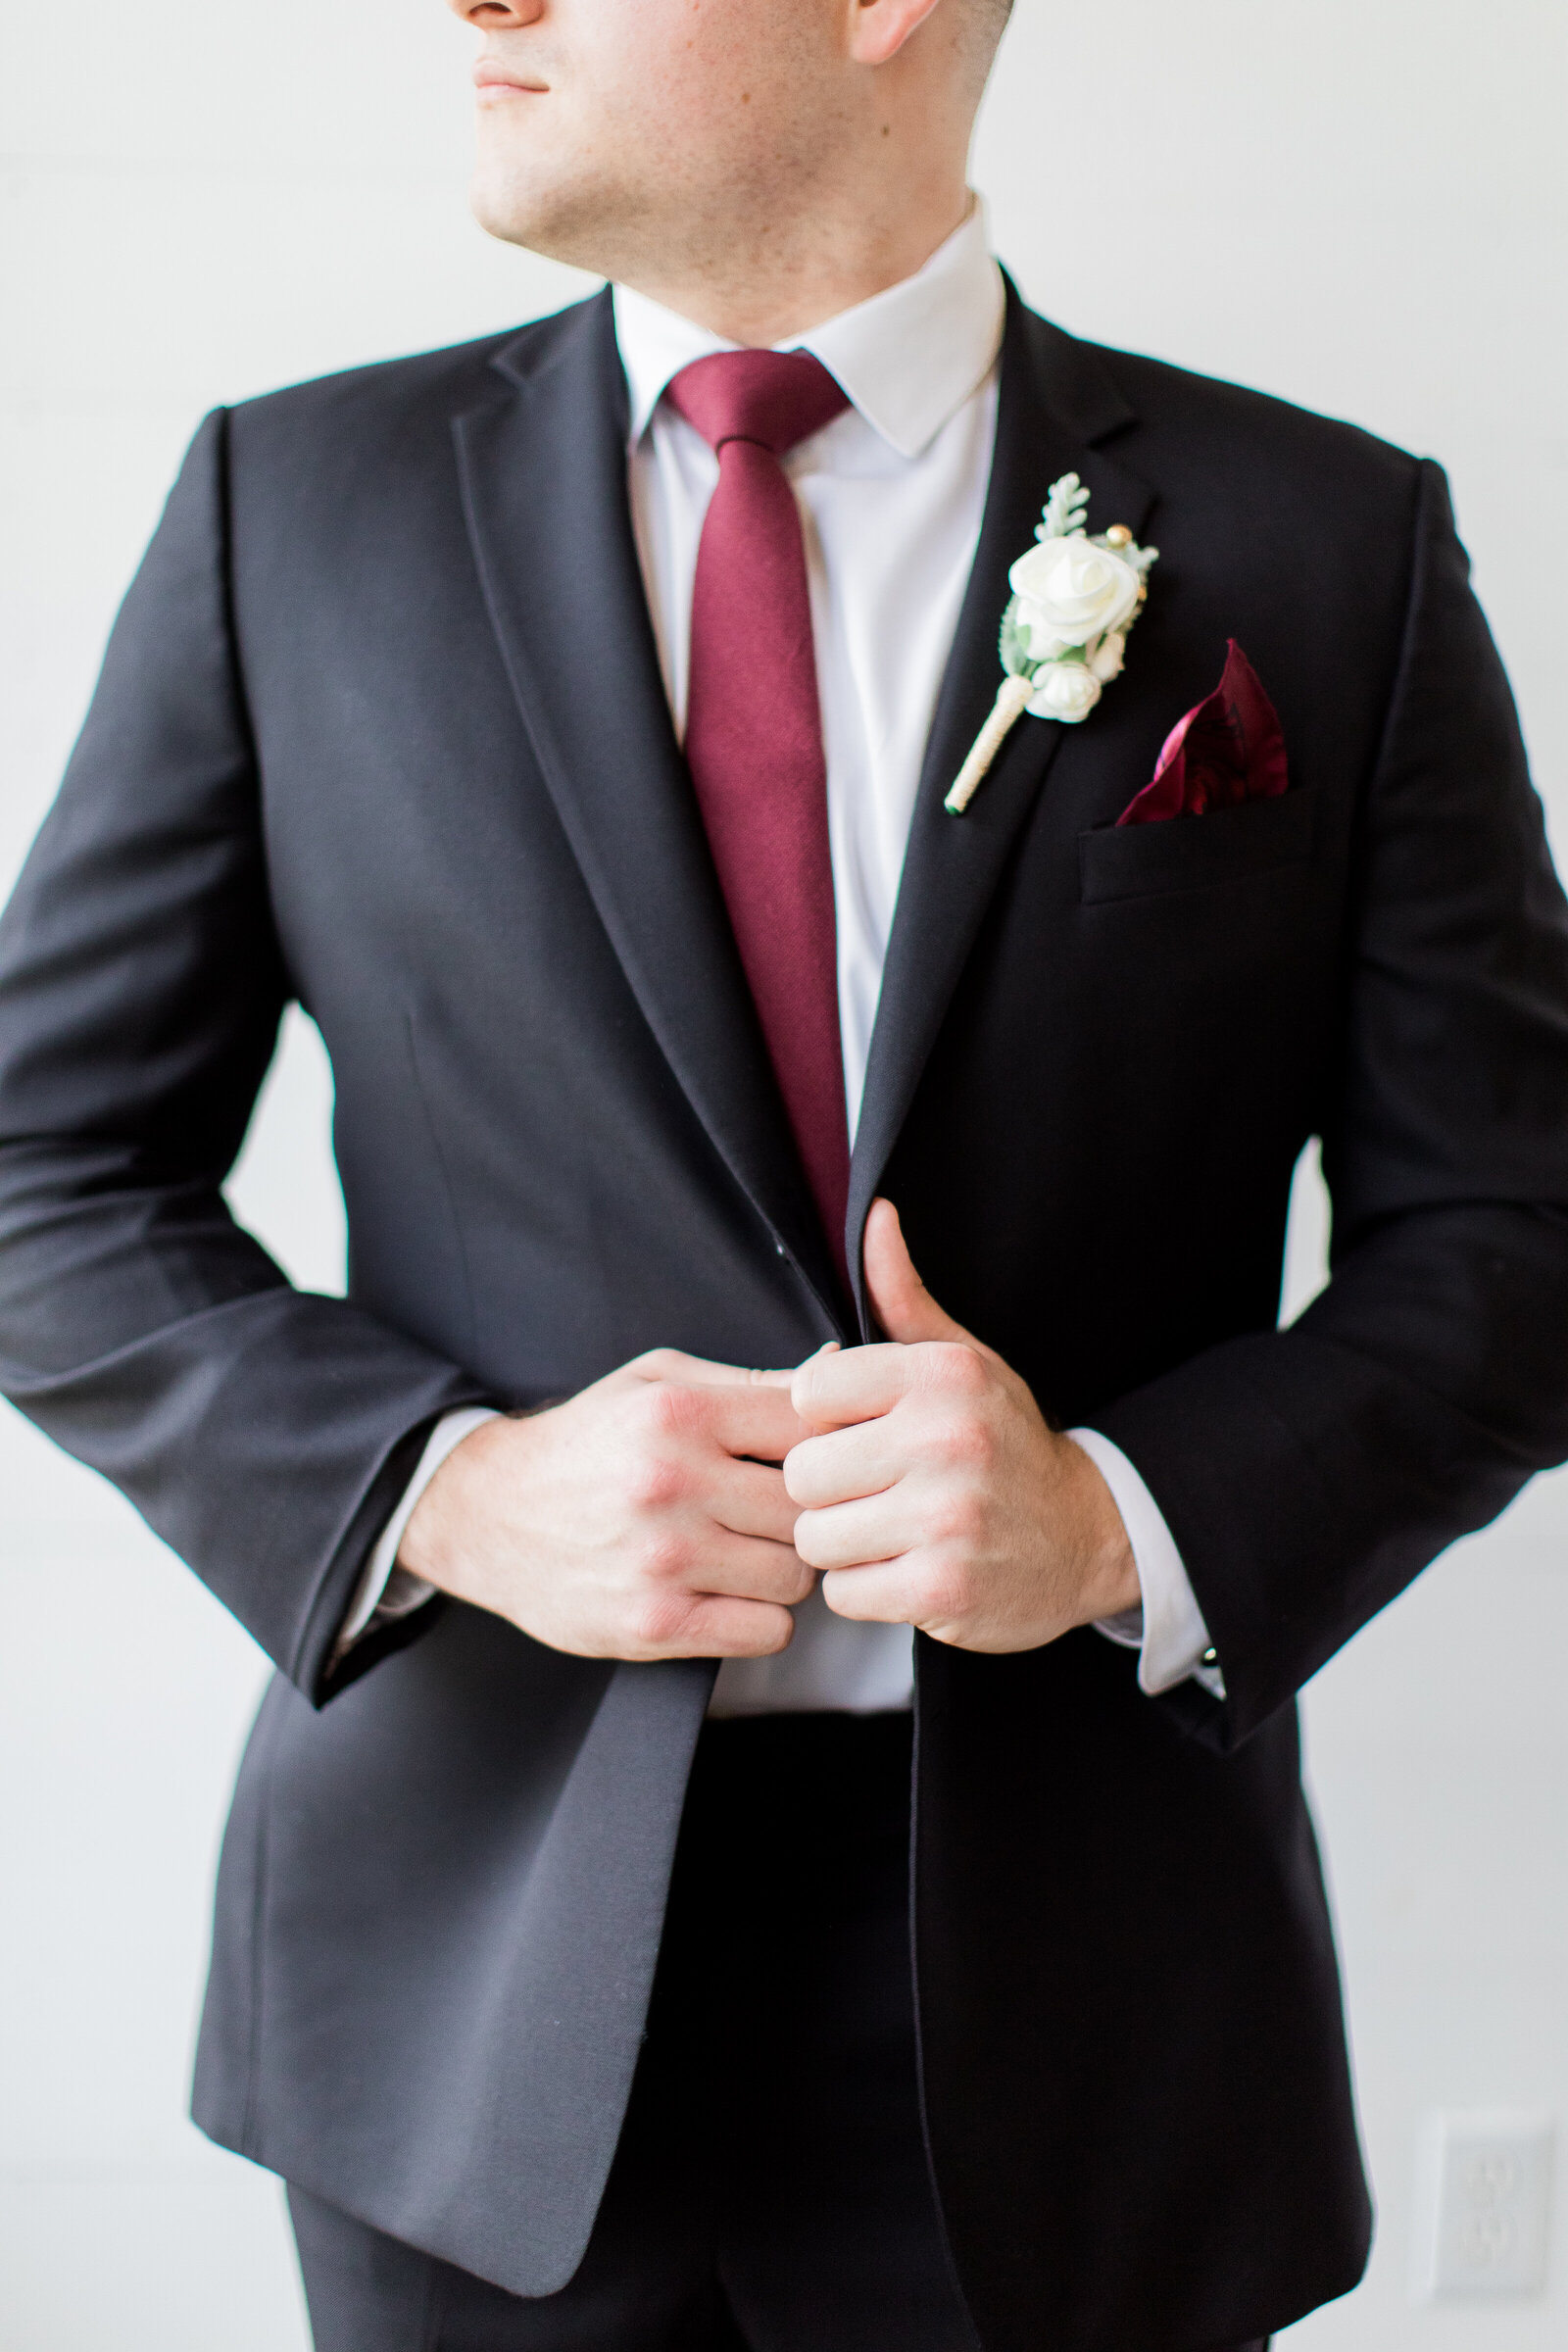 Groom at The Greenery in Amite, LA